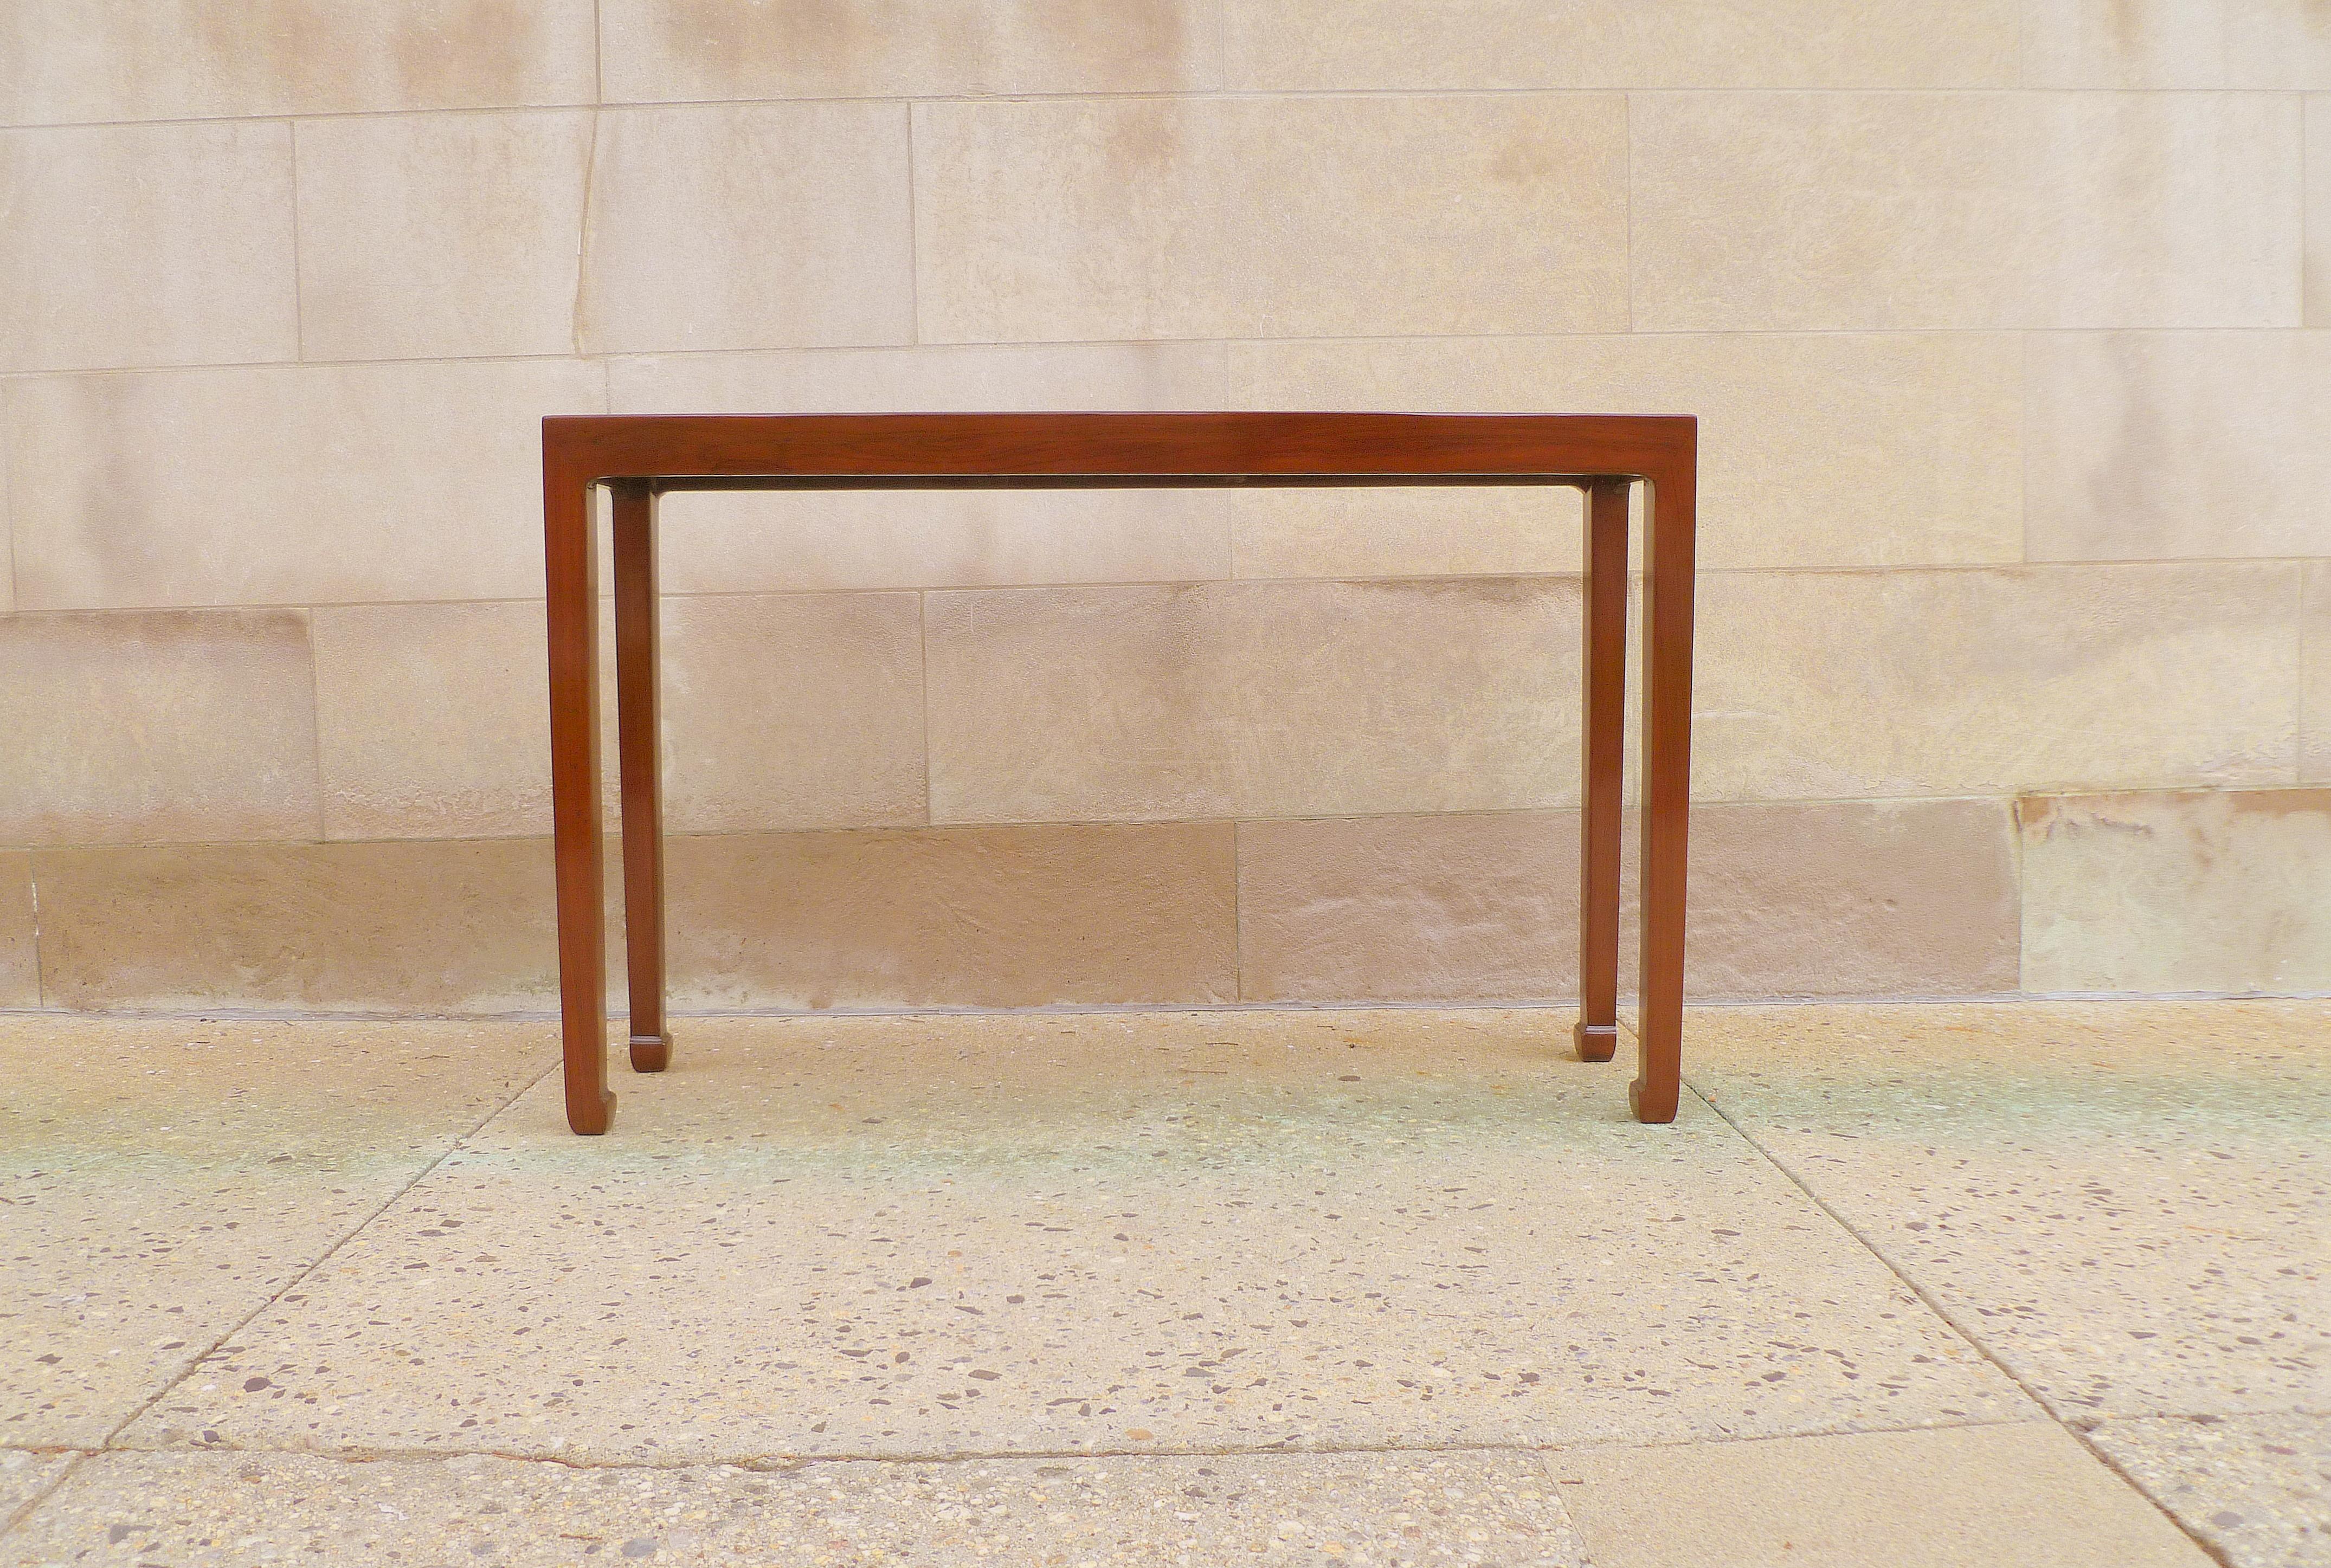 Fine and elegant jumu wood console table, simple lines and form. We carry fine quality furniture with elegant finished and has been appeared many times in 